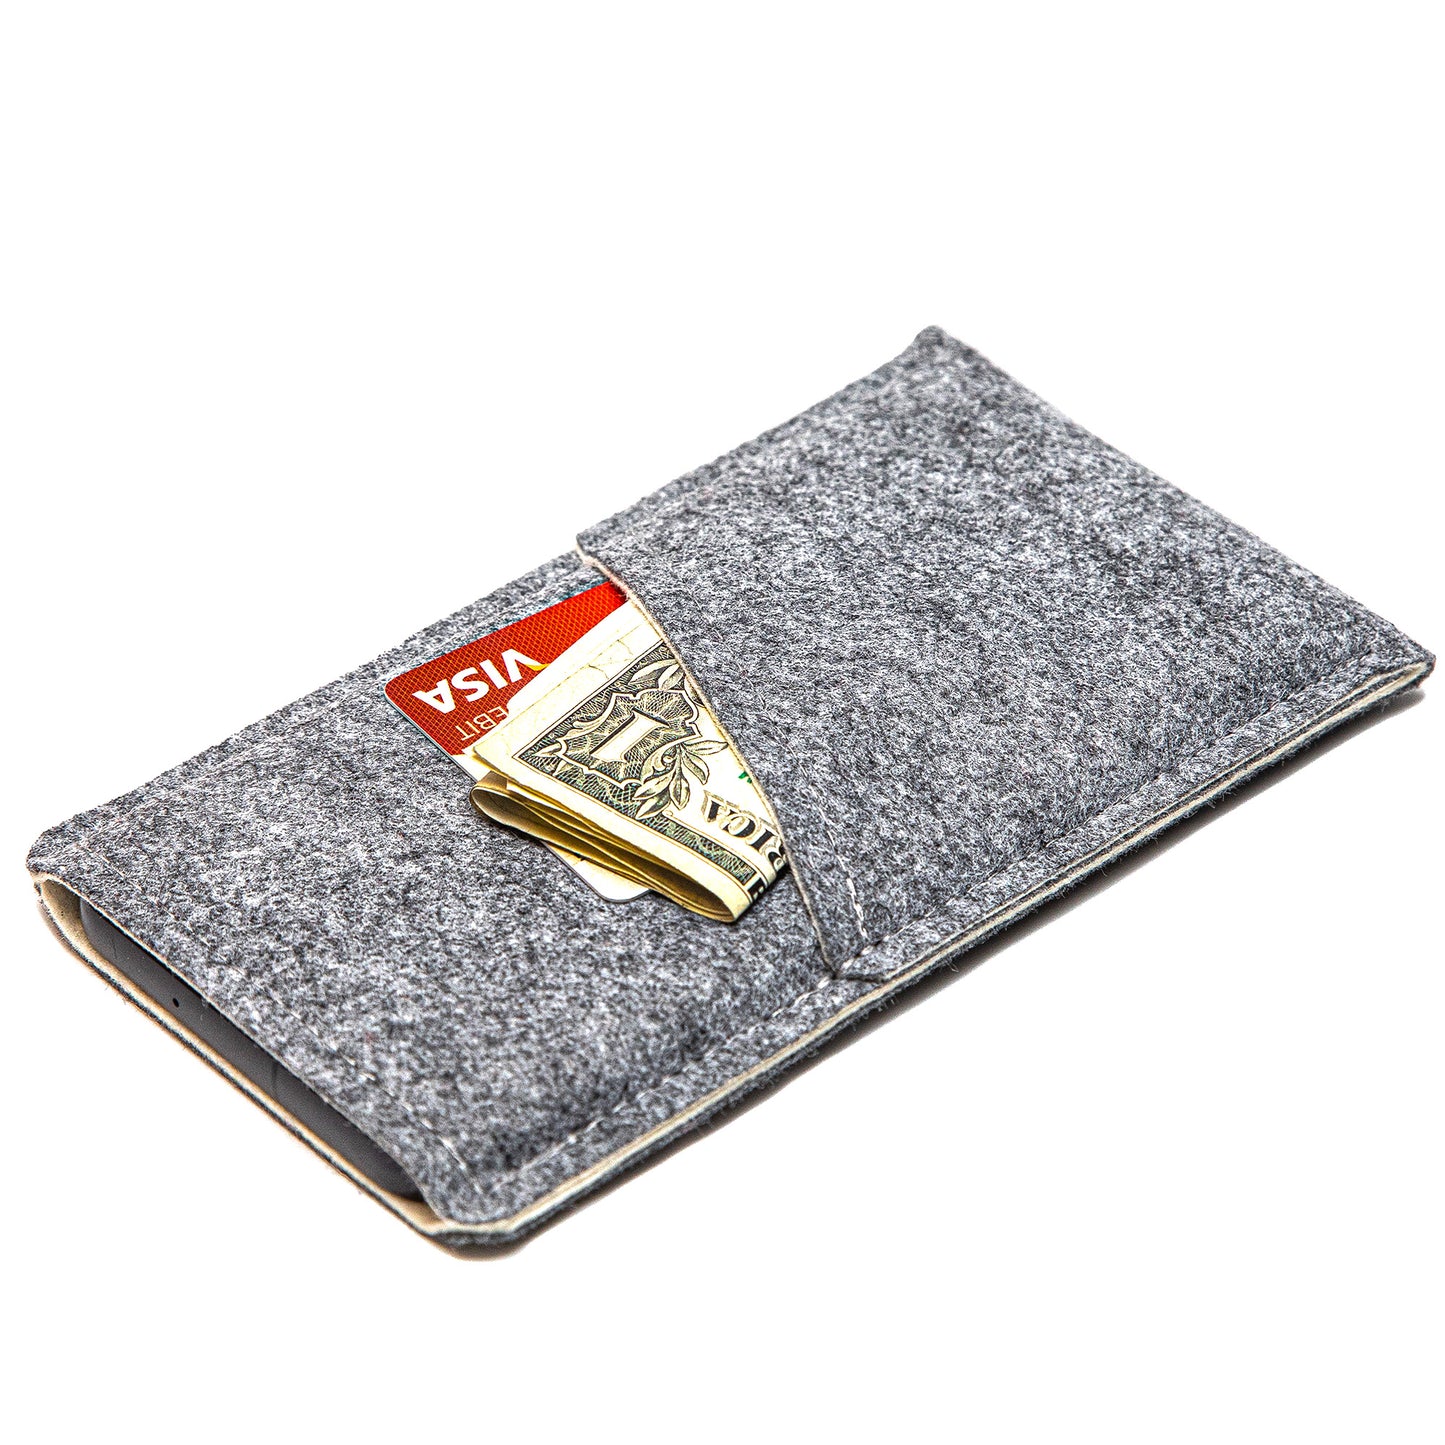 Handmade Felt Sleeve with Card Holder for Mobile Devices | Stylish, Protective, and Customizable Sizes